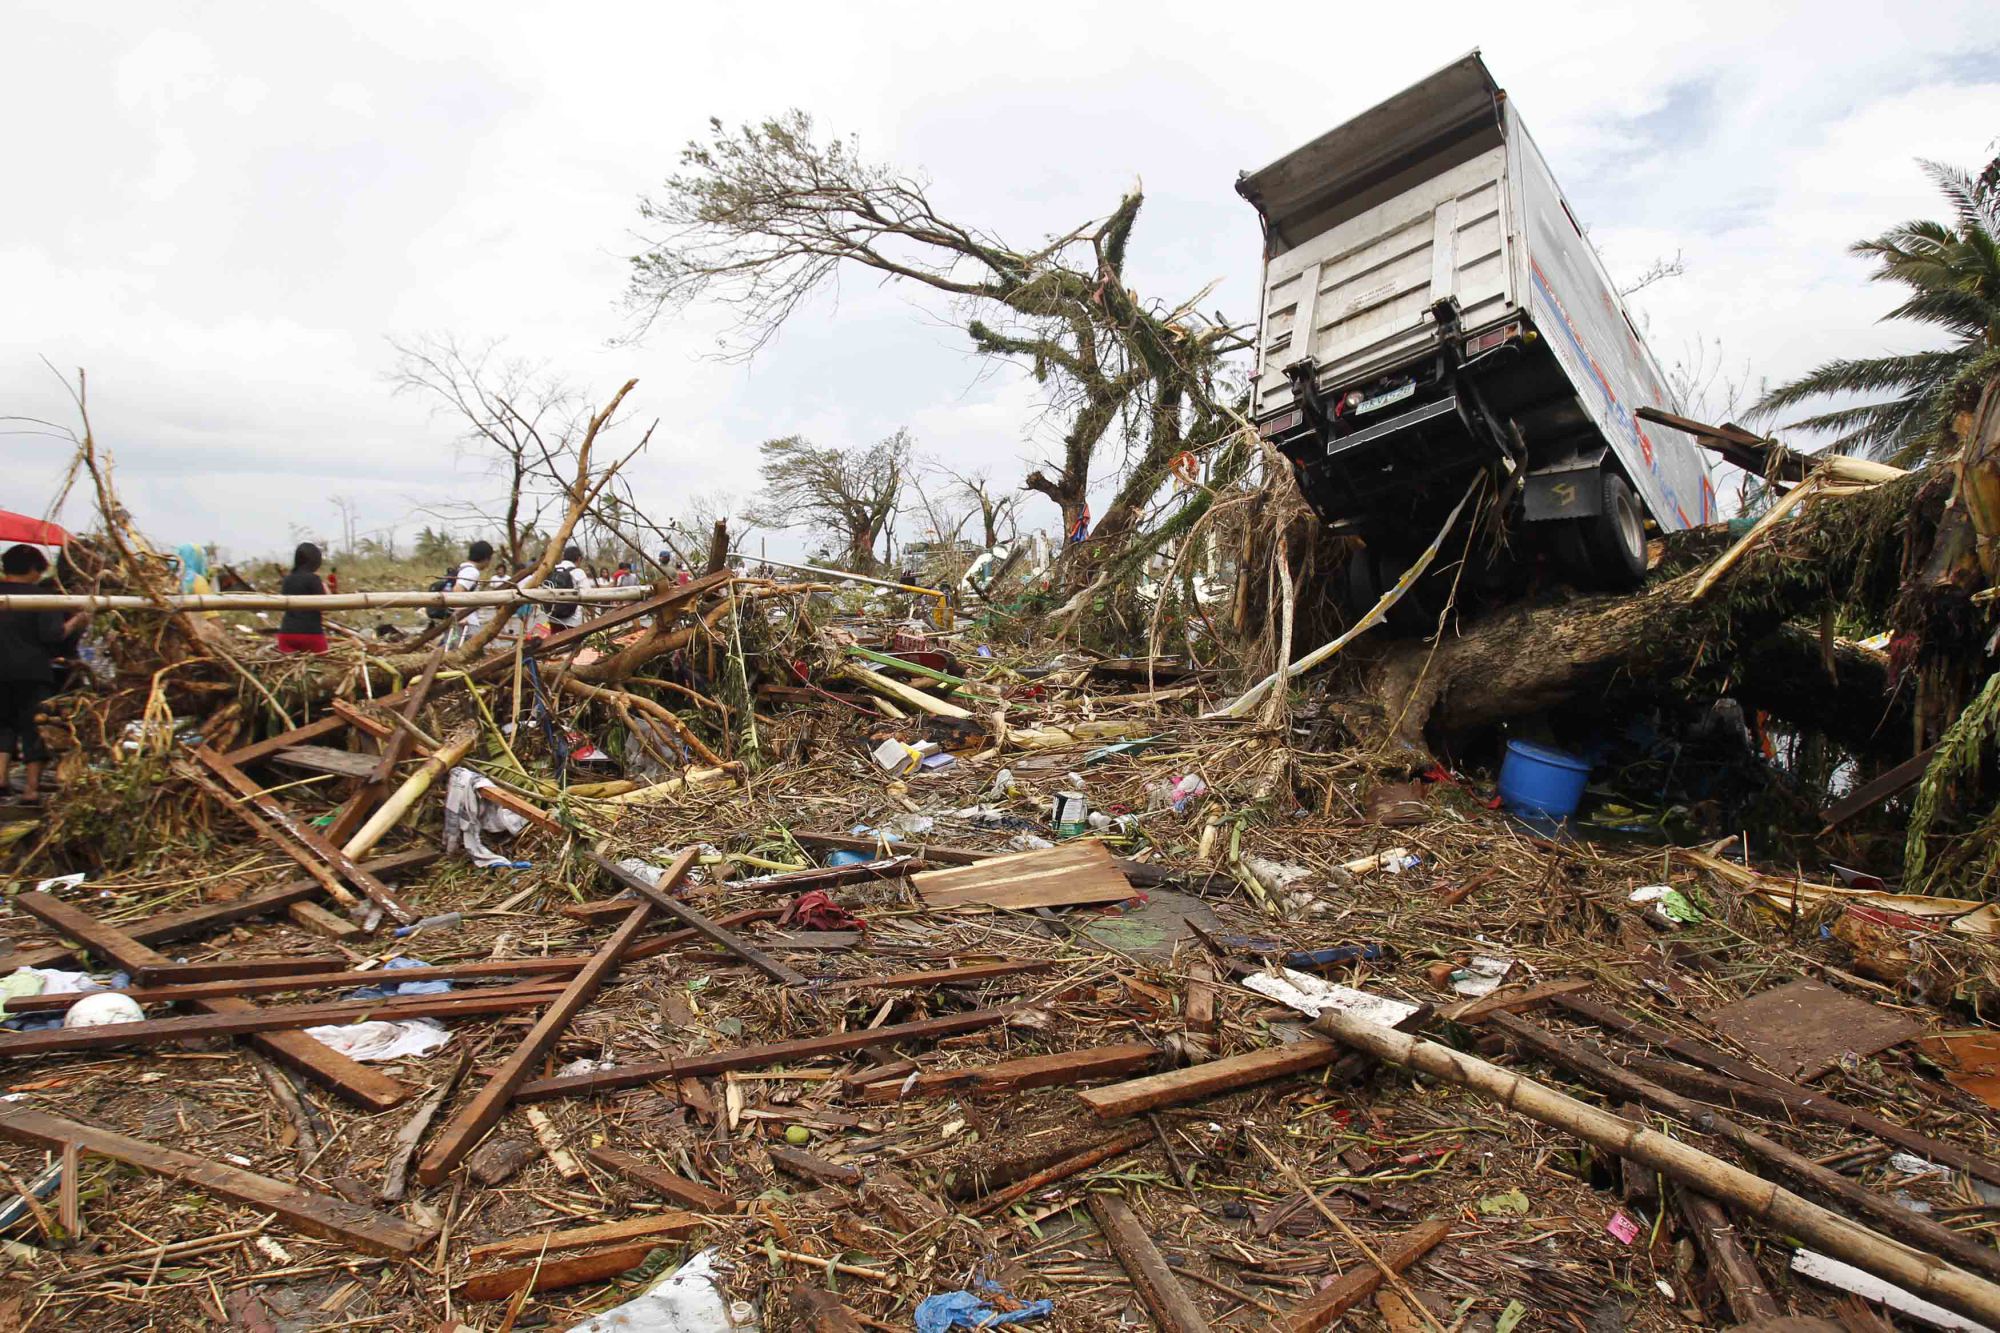 A truck is seen on a tree in the aftermath of Supertyphoon Haiyan in Tacloban, the Philippines, on Nov. 9, 2013